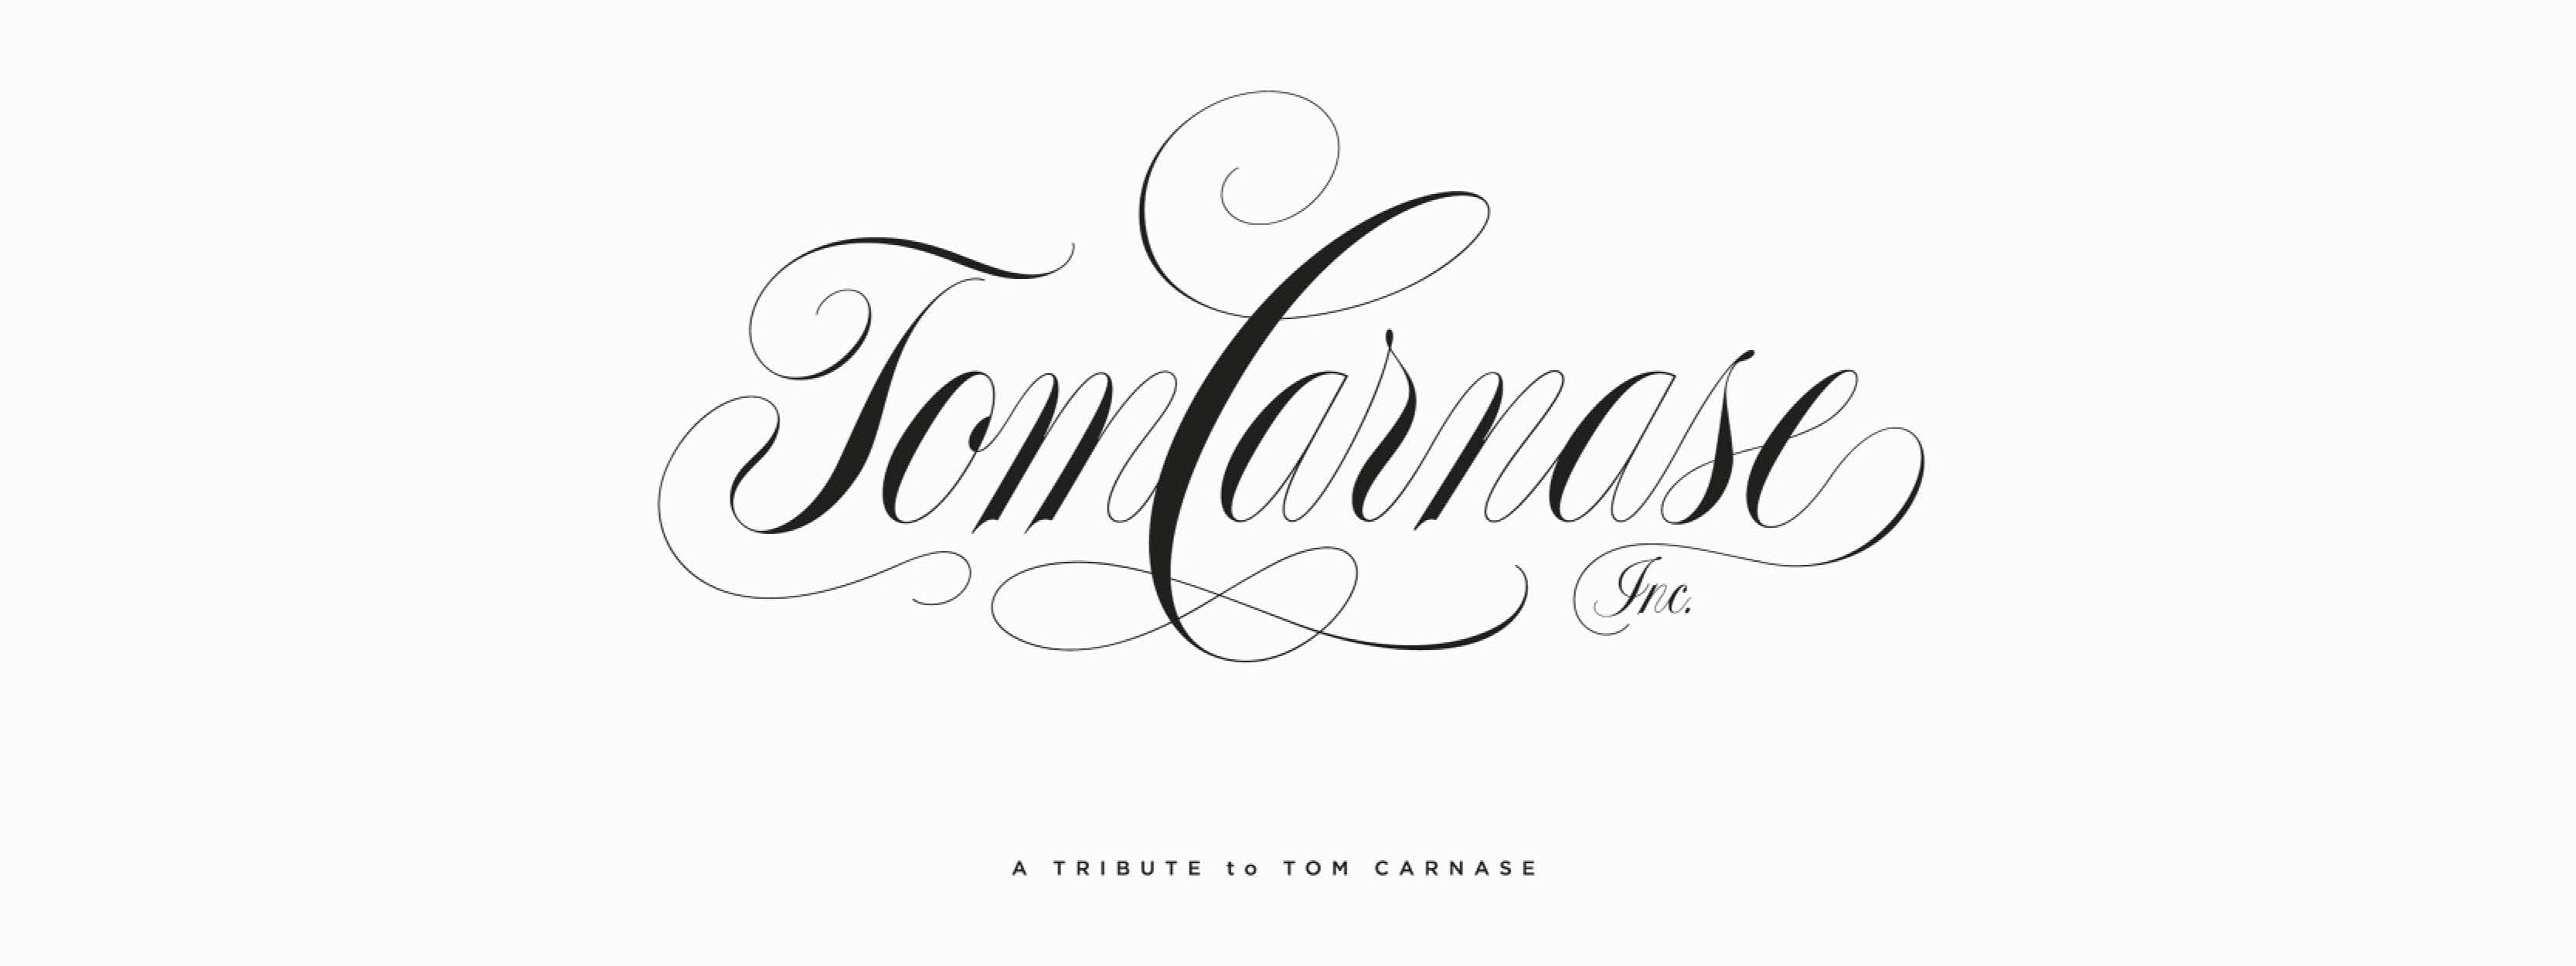 A tribute to Tom Carnase (Lubalin’s collaborator) by Keith Morris.